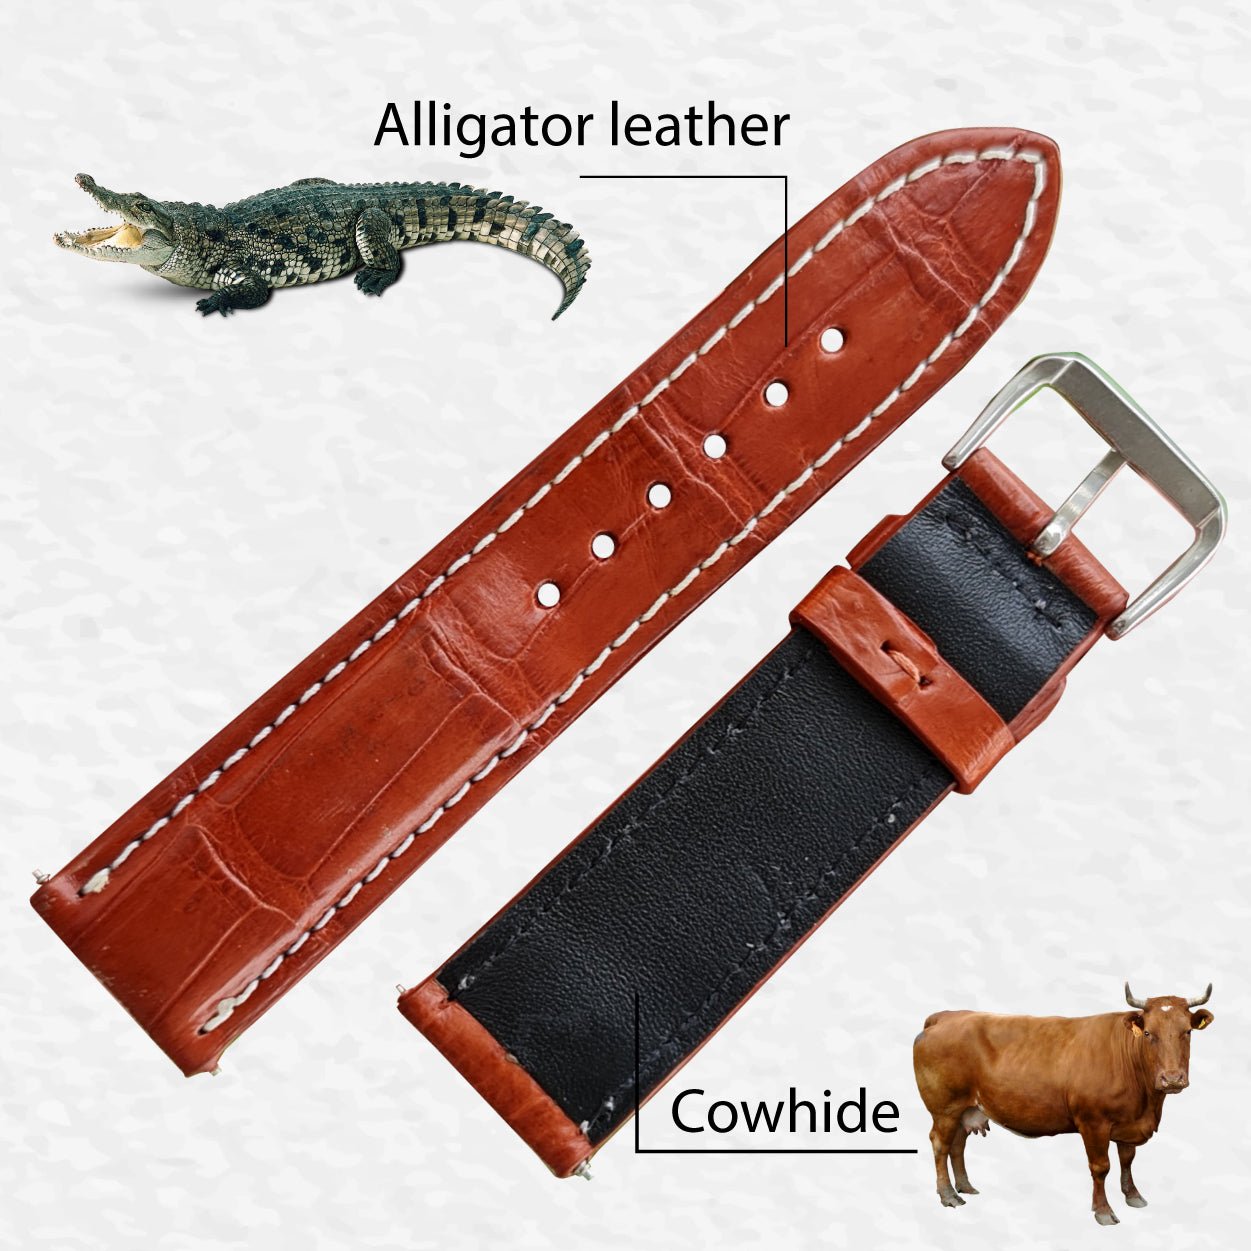 White Stitching Light Brown Alligator Leather Watch Band DH-76 - Vinacreations